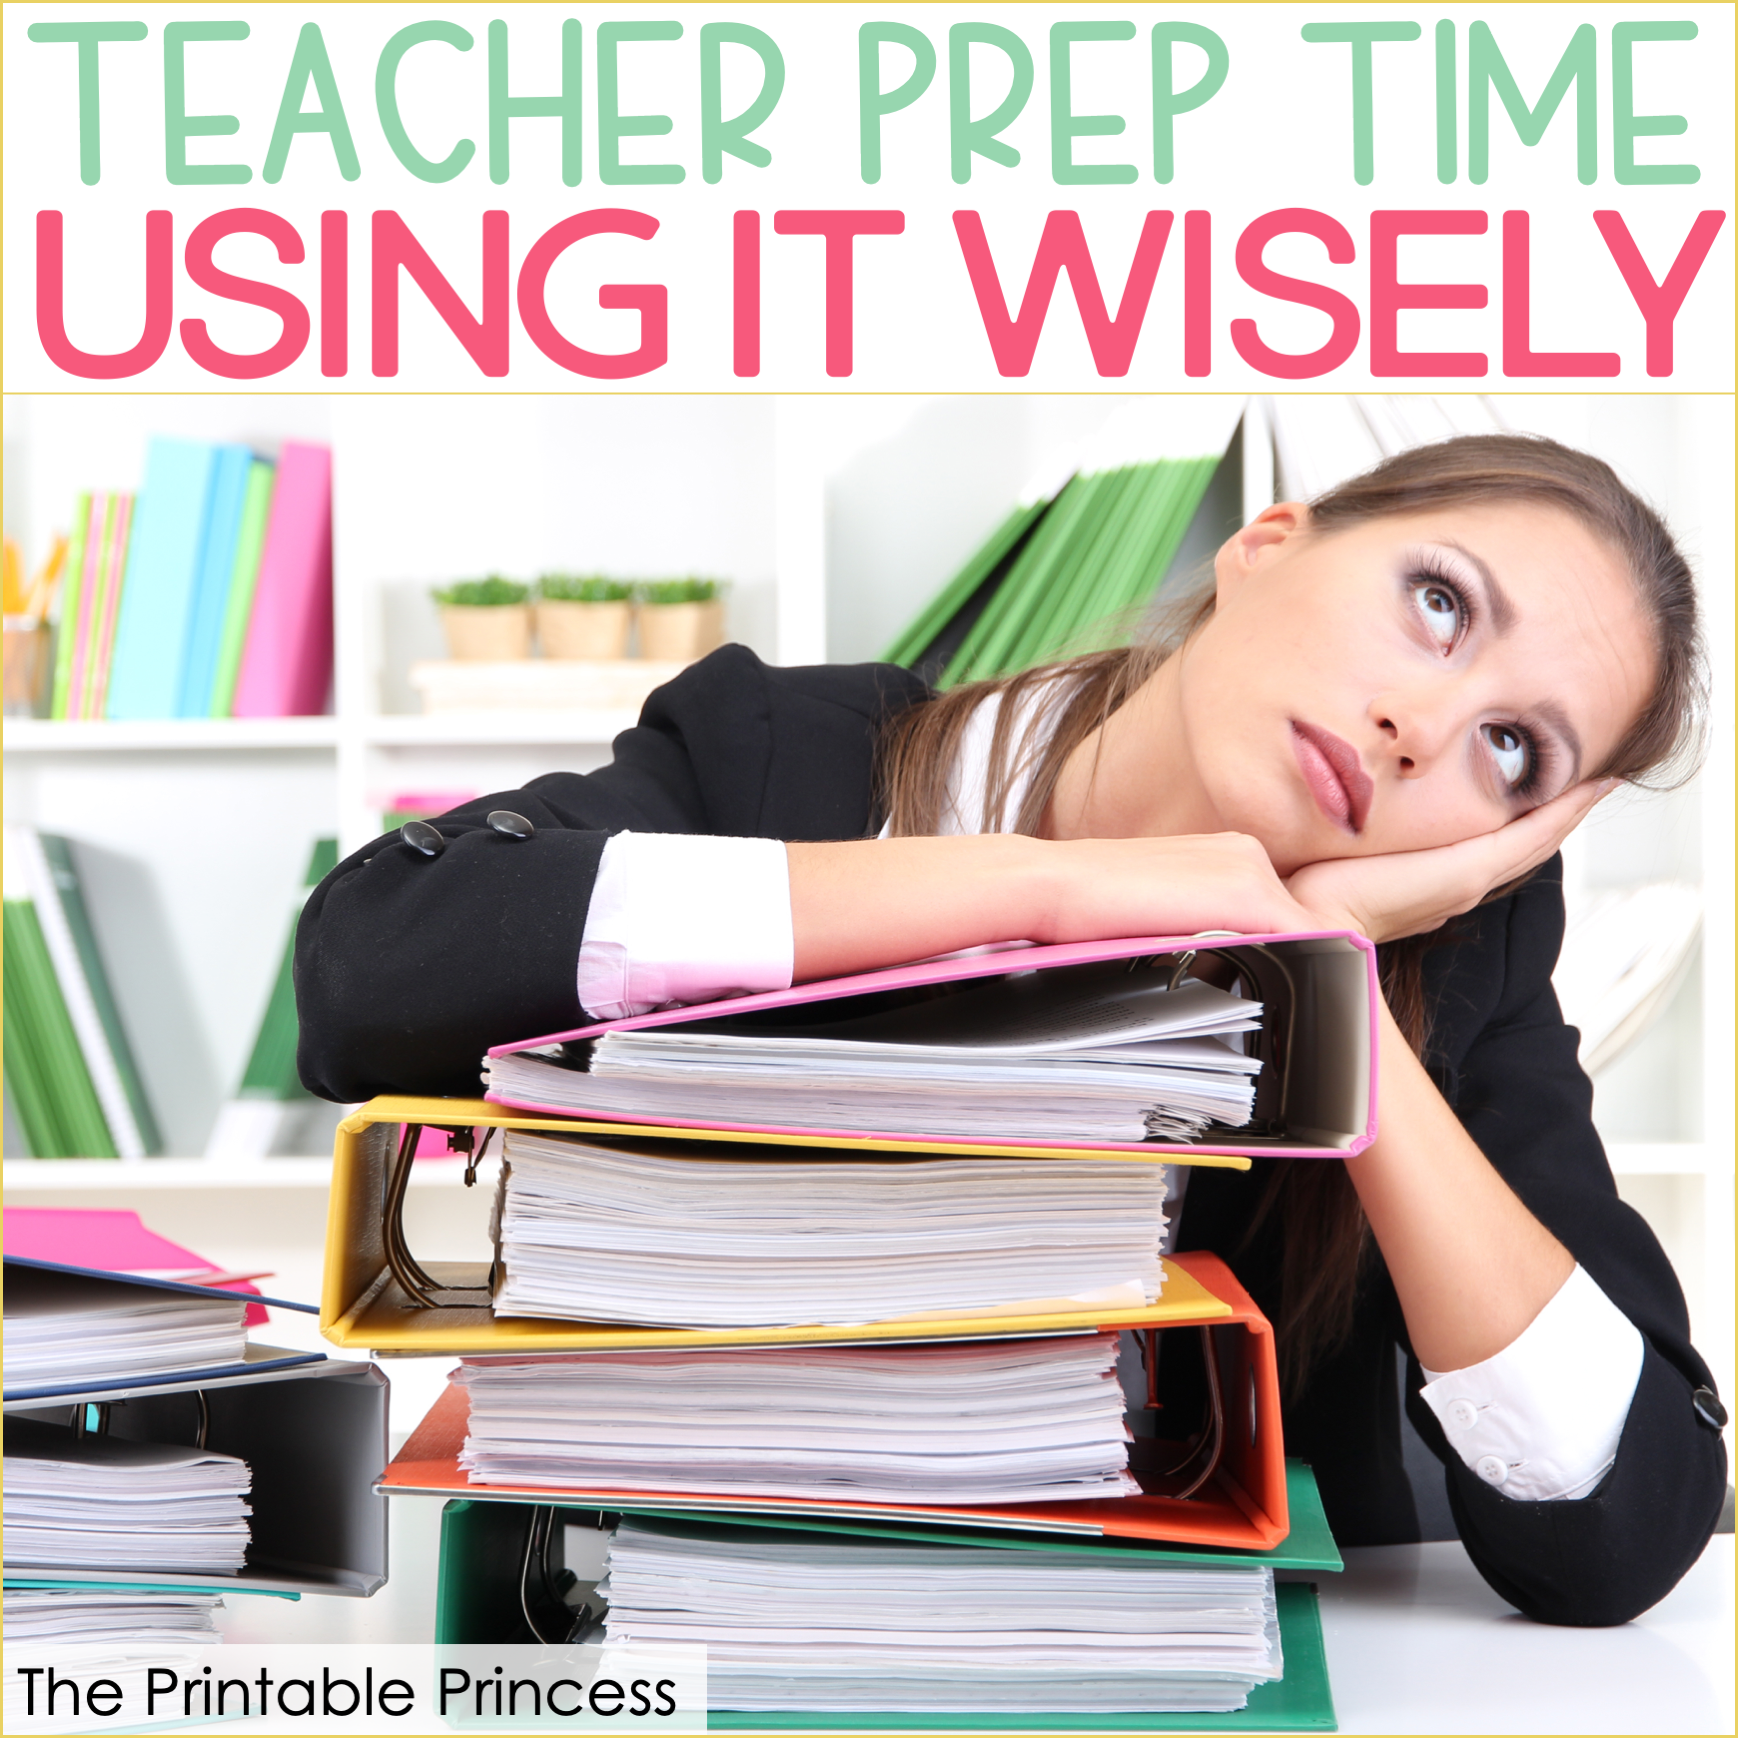 Making the Most of Your Teacher Planning Time